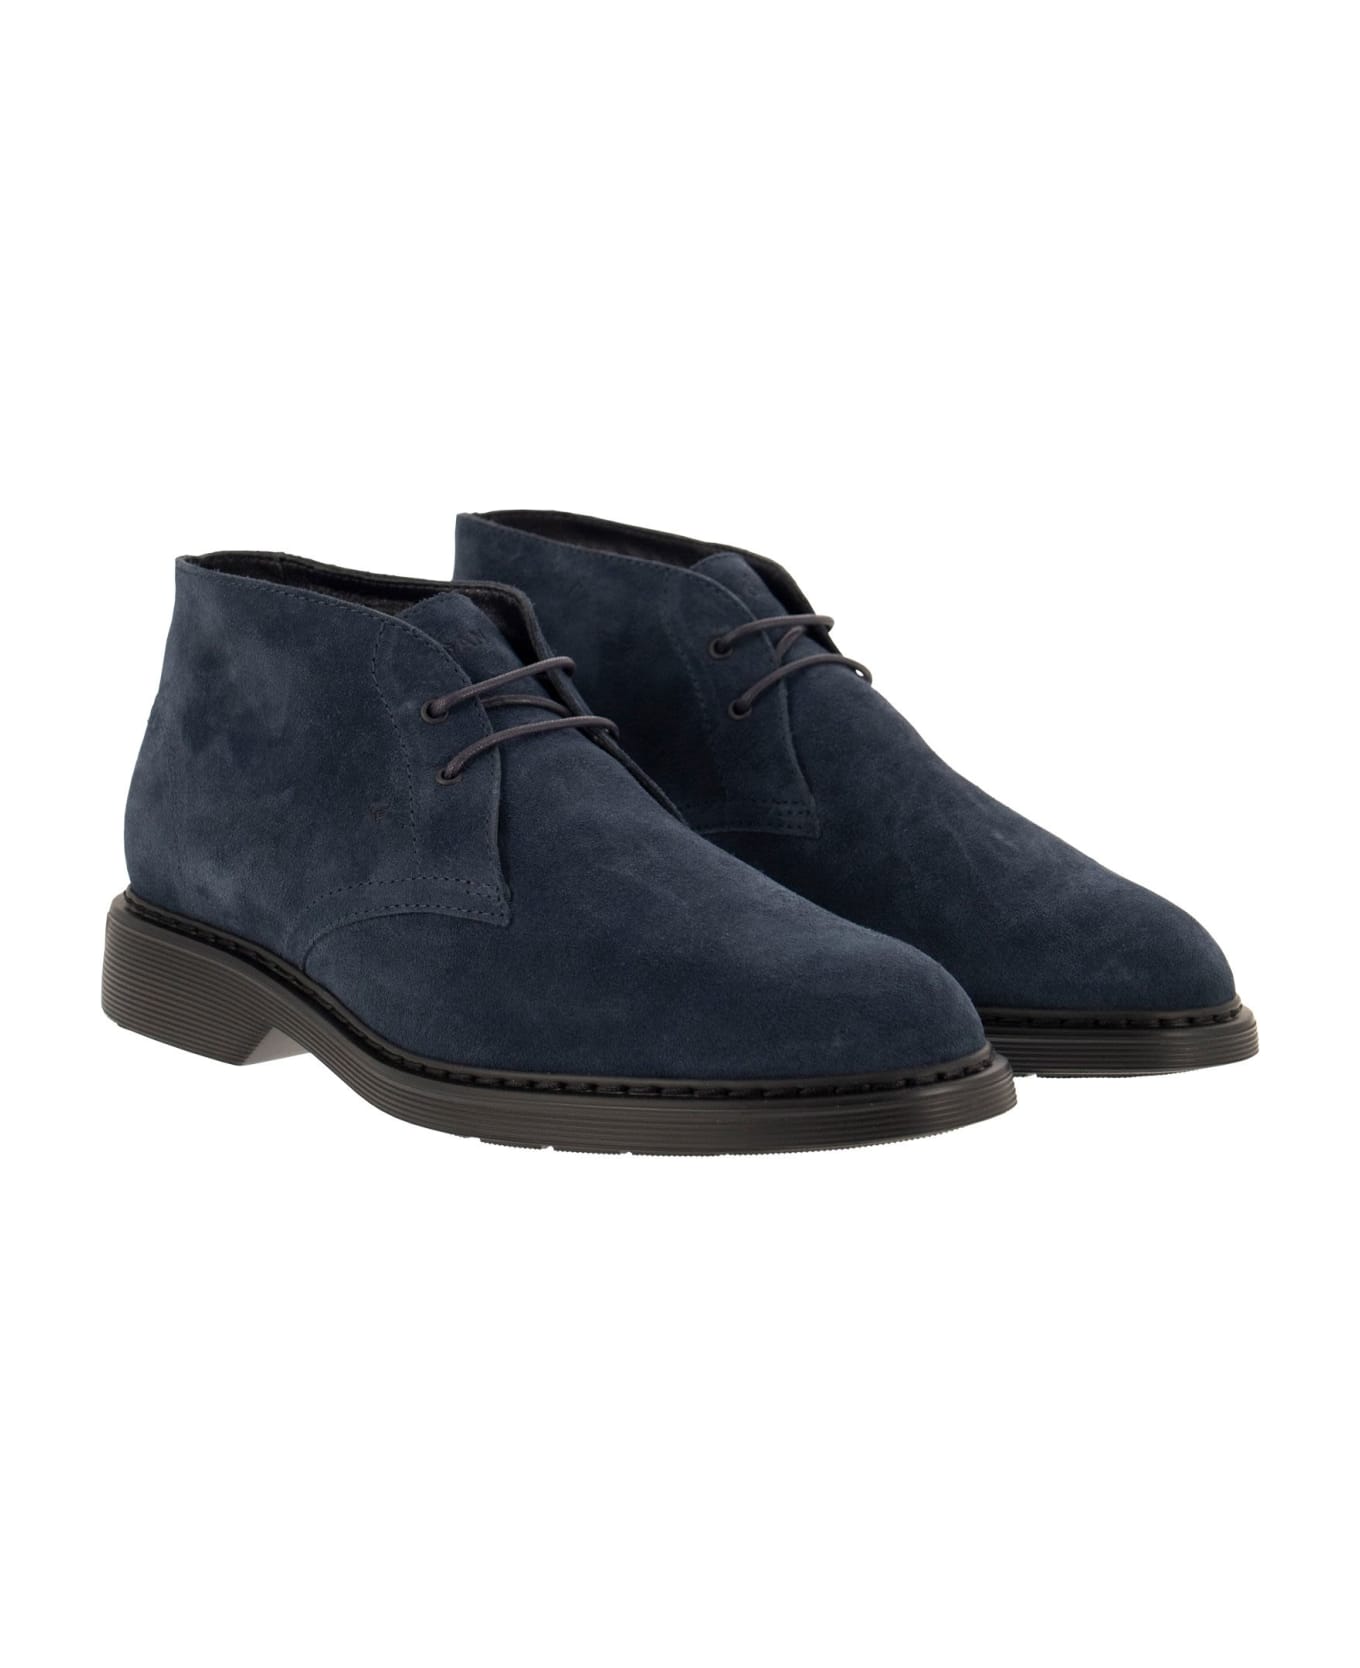 Hogan H576 - Suede Ankle Boots - Navy Blue ブーツ